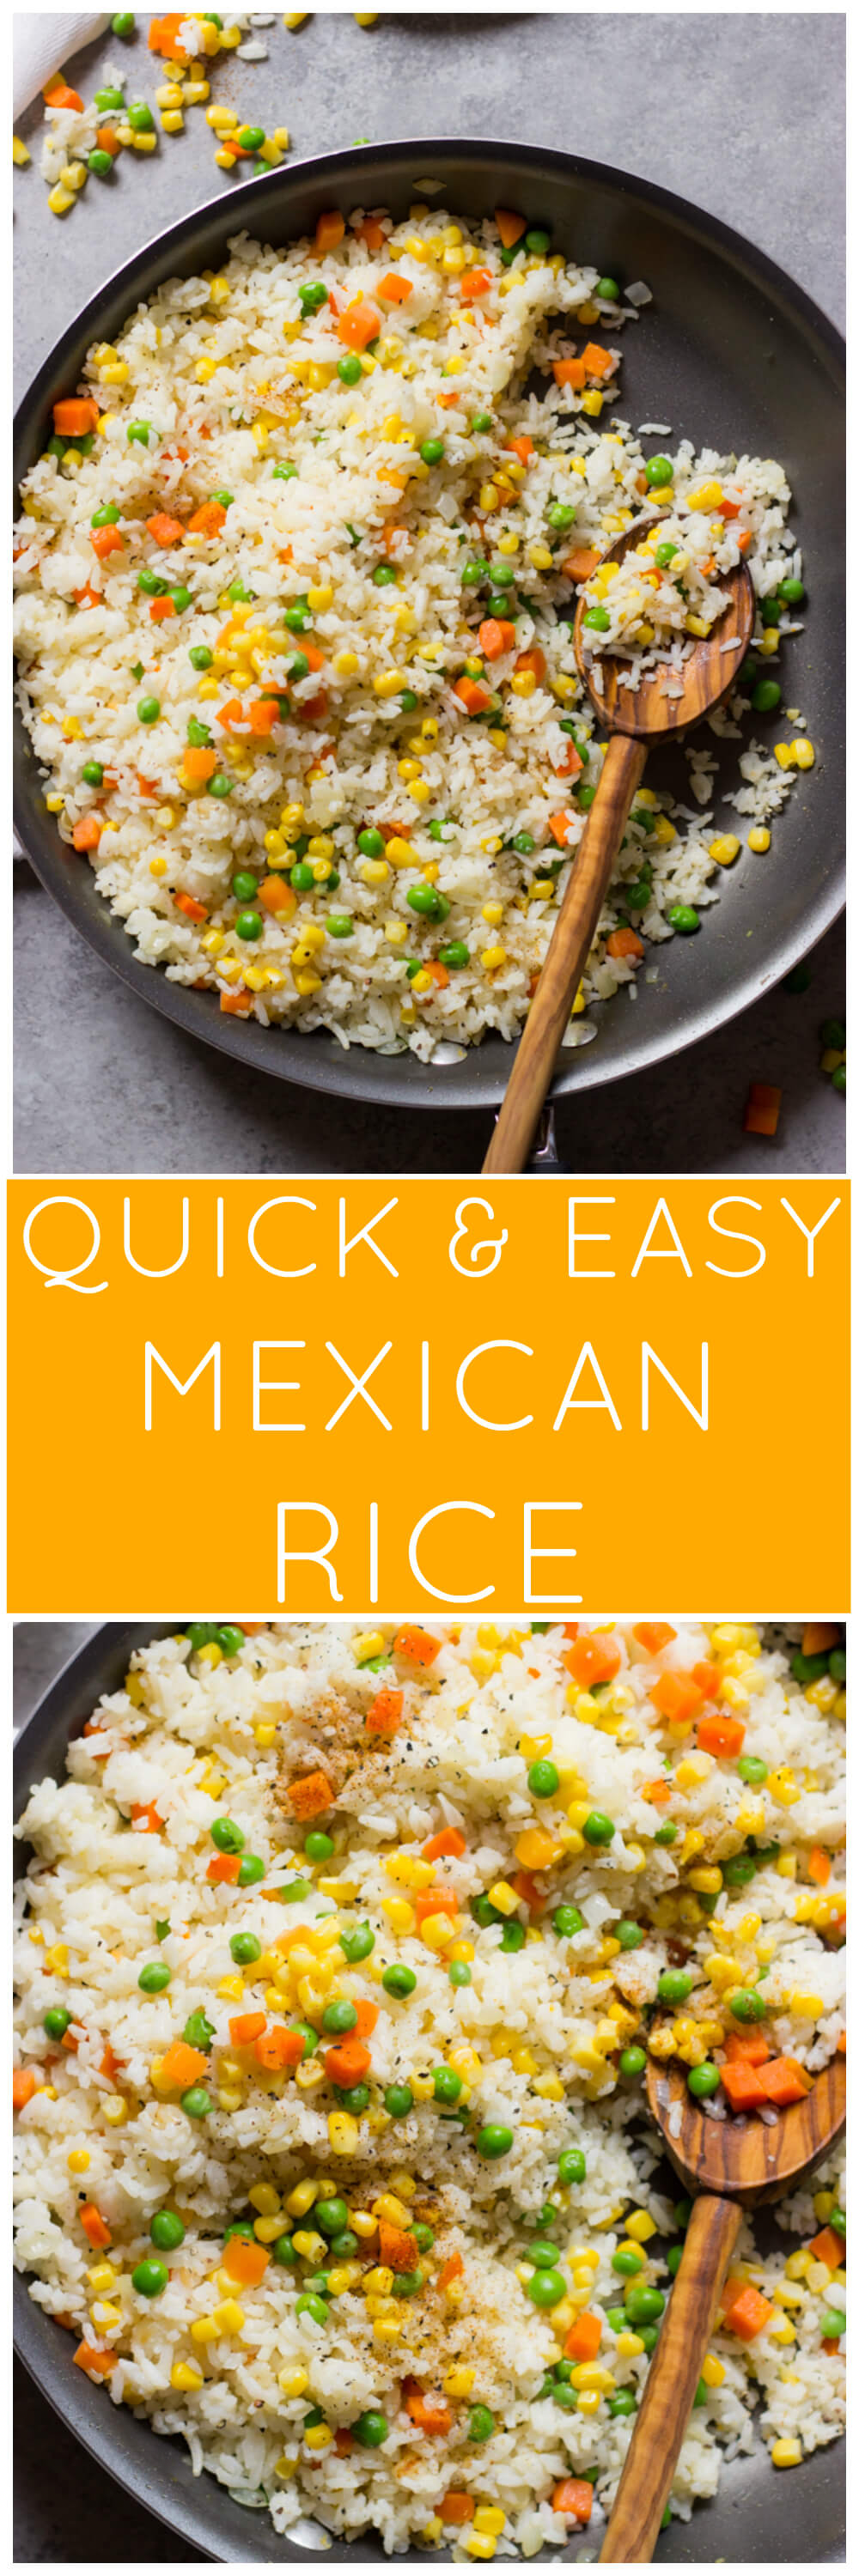 Mom's Mexican Rice - simple 6 ingredients to make this delicious side dish! | littlebroken.com @littlebroken